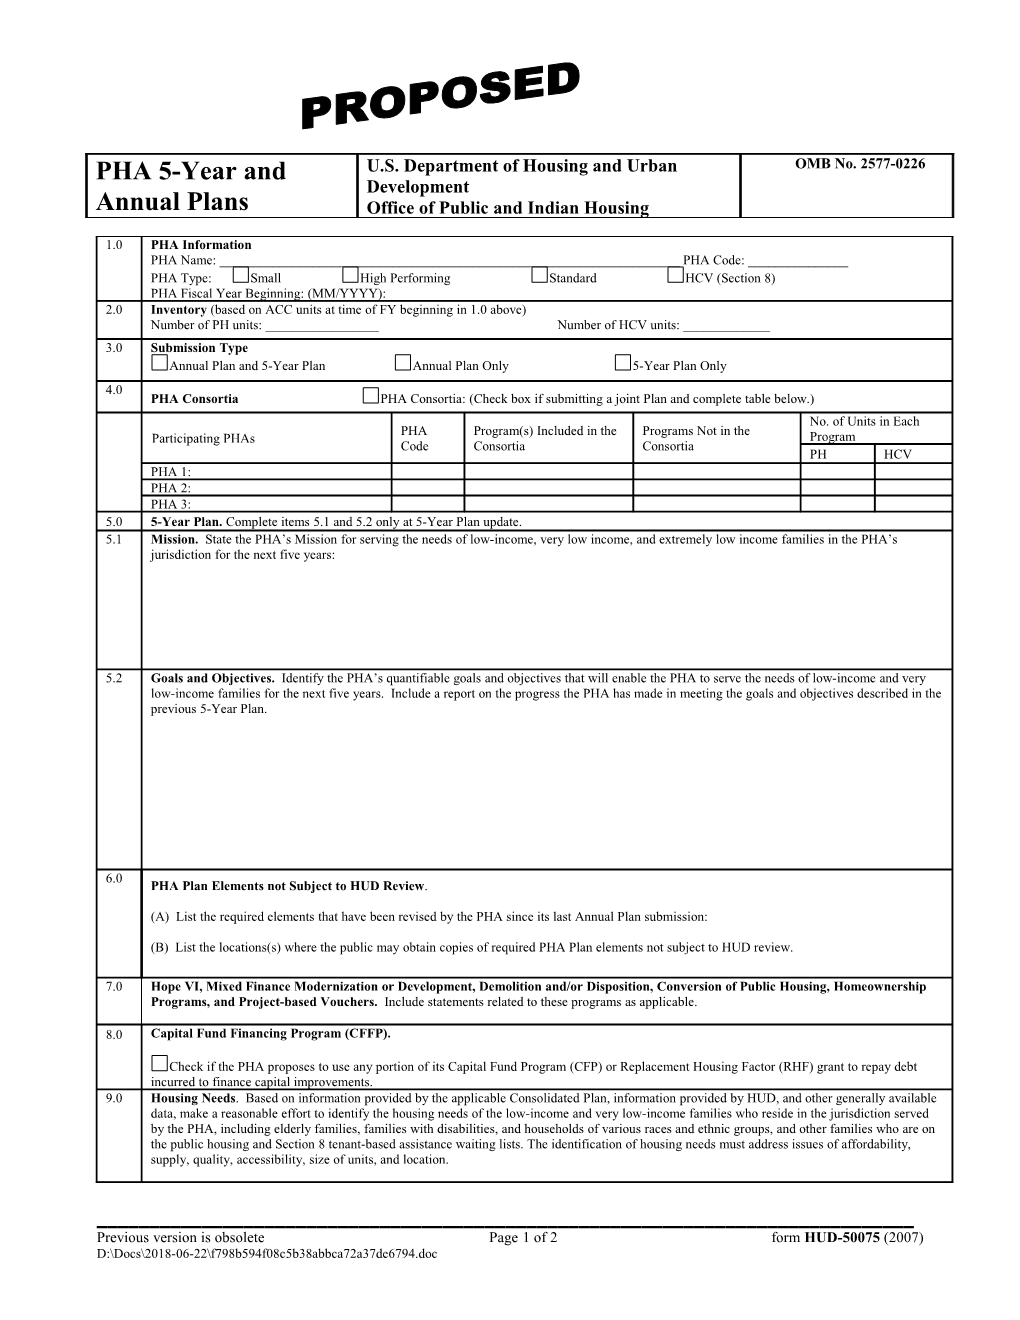 Previous Version Is Obsolete Page 2 of 2 Form HUD-50075 (2007)